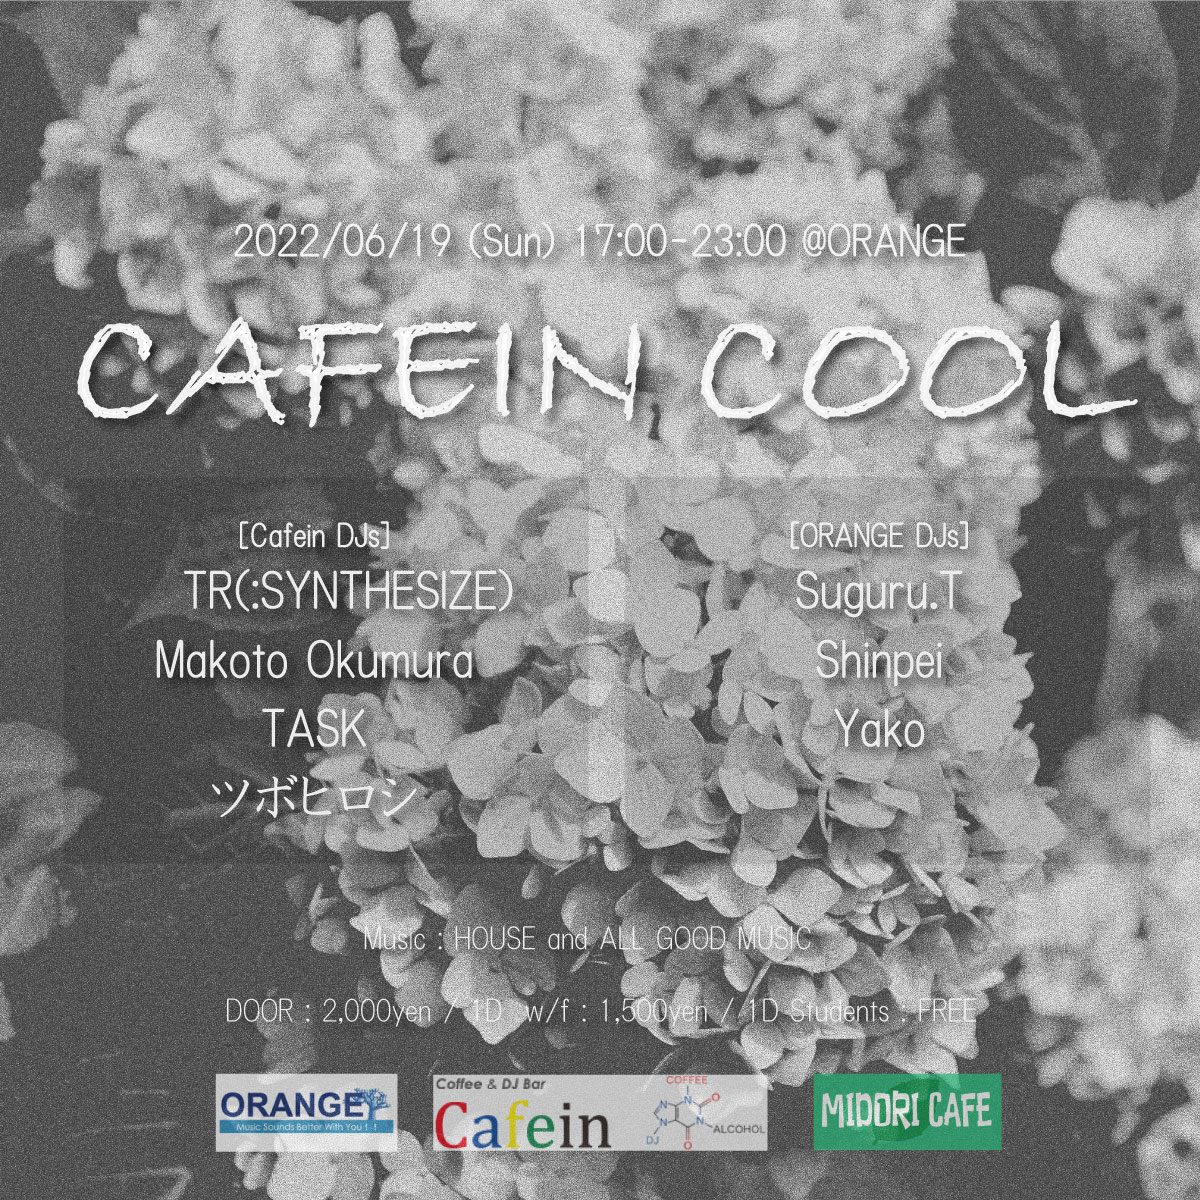 CAFEIN COOL